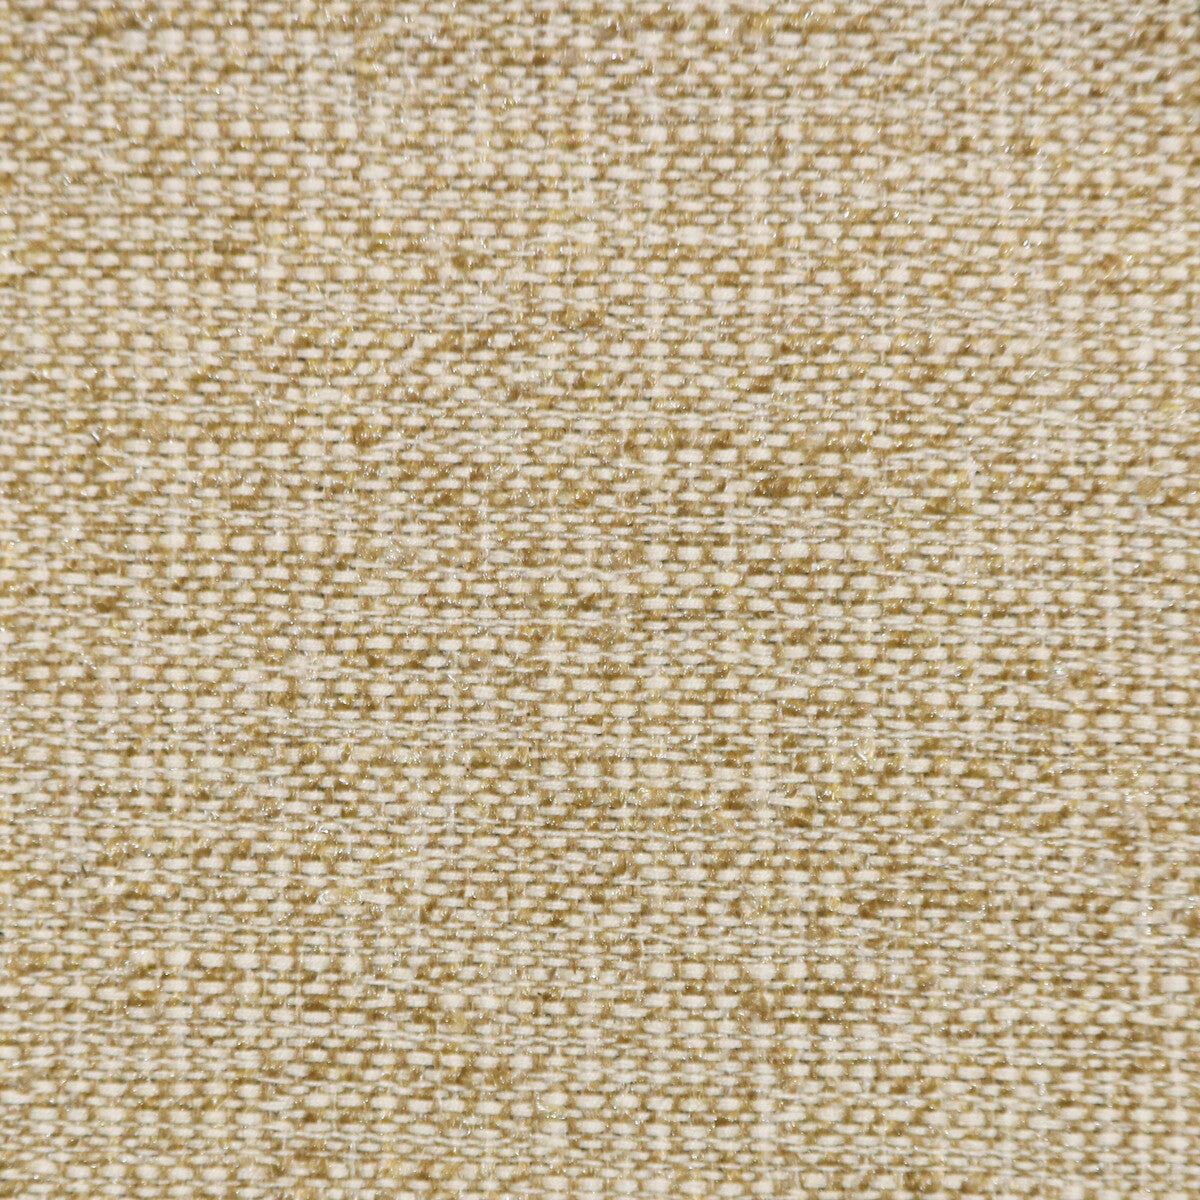 Kravet Smart fabric in 34616-16 color - pattern 34616.16.0 - by Kravet Smart in the Crypton Home collection